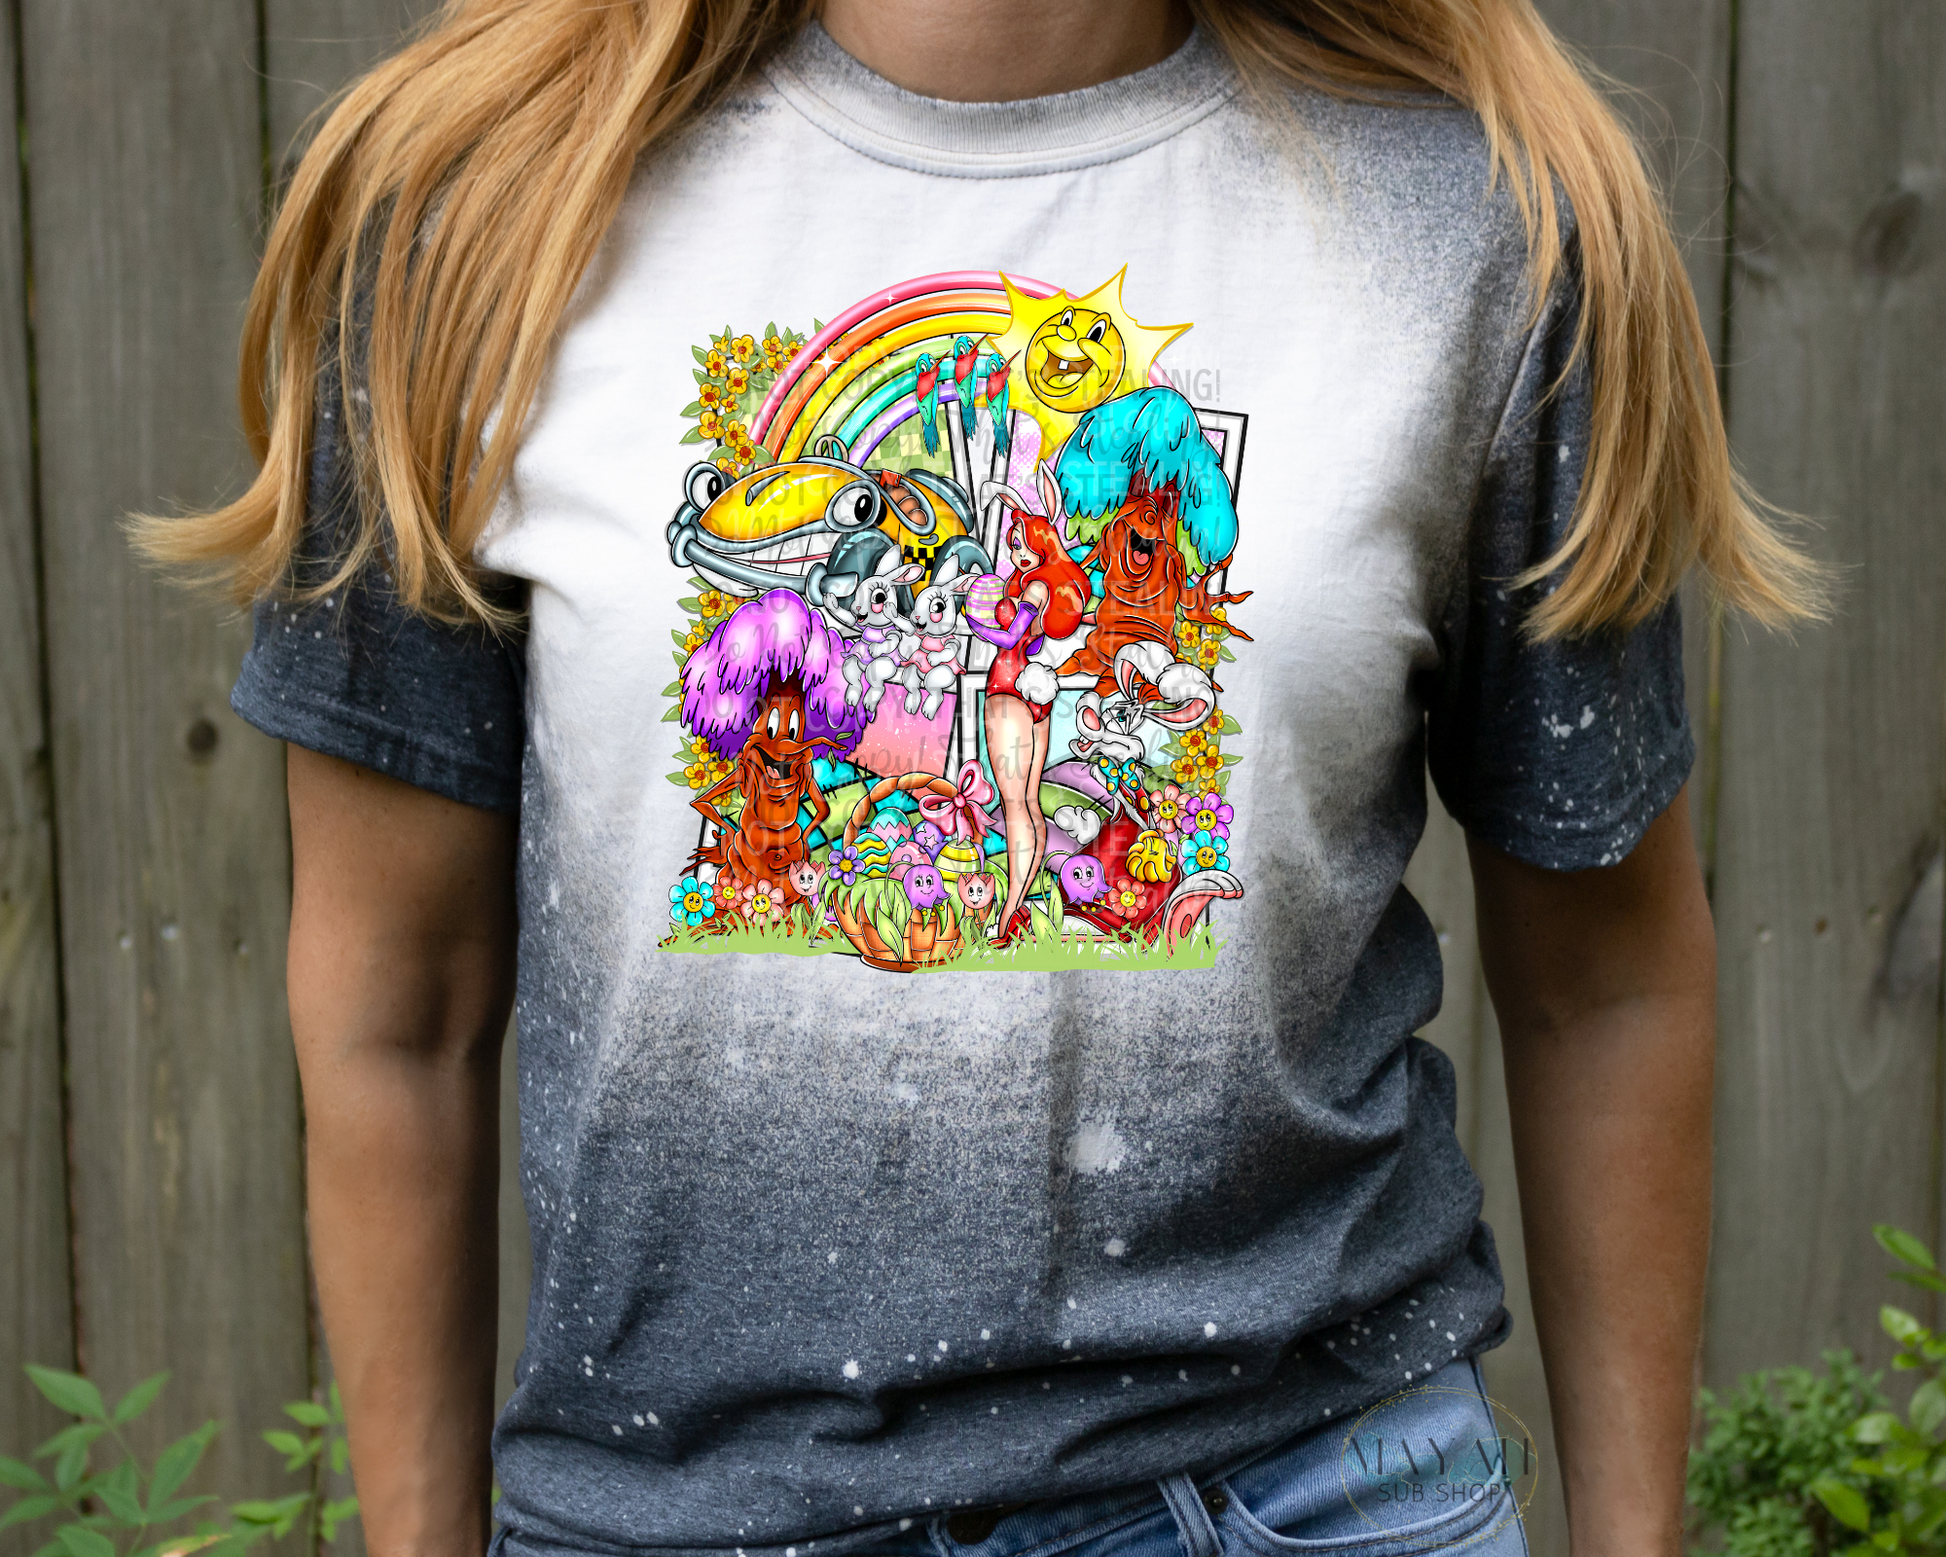 Easter Toon Bleached Tee - Mayan Sub Shop